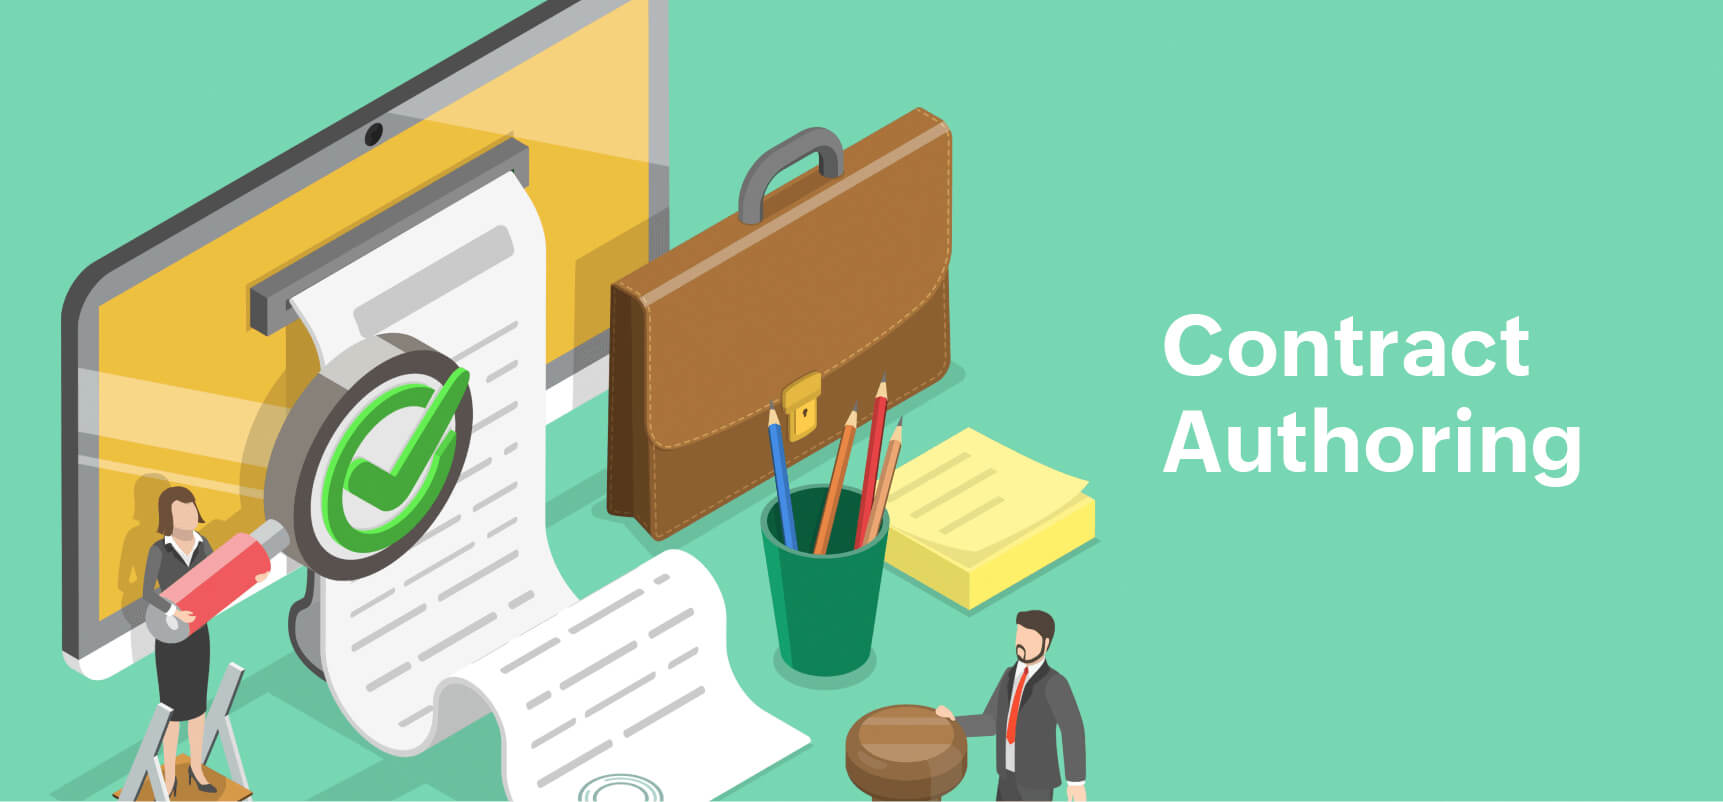 Contract Authoring Attributes